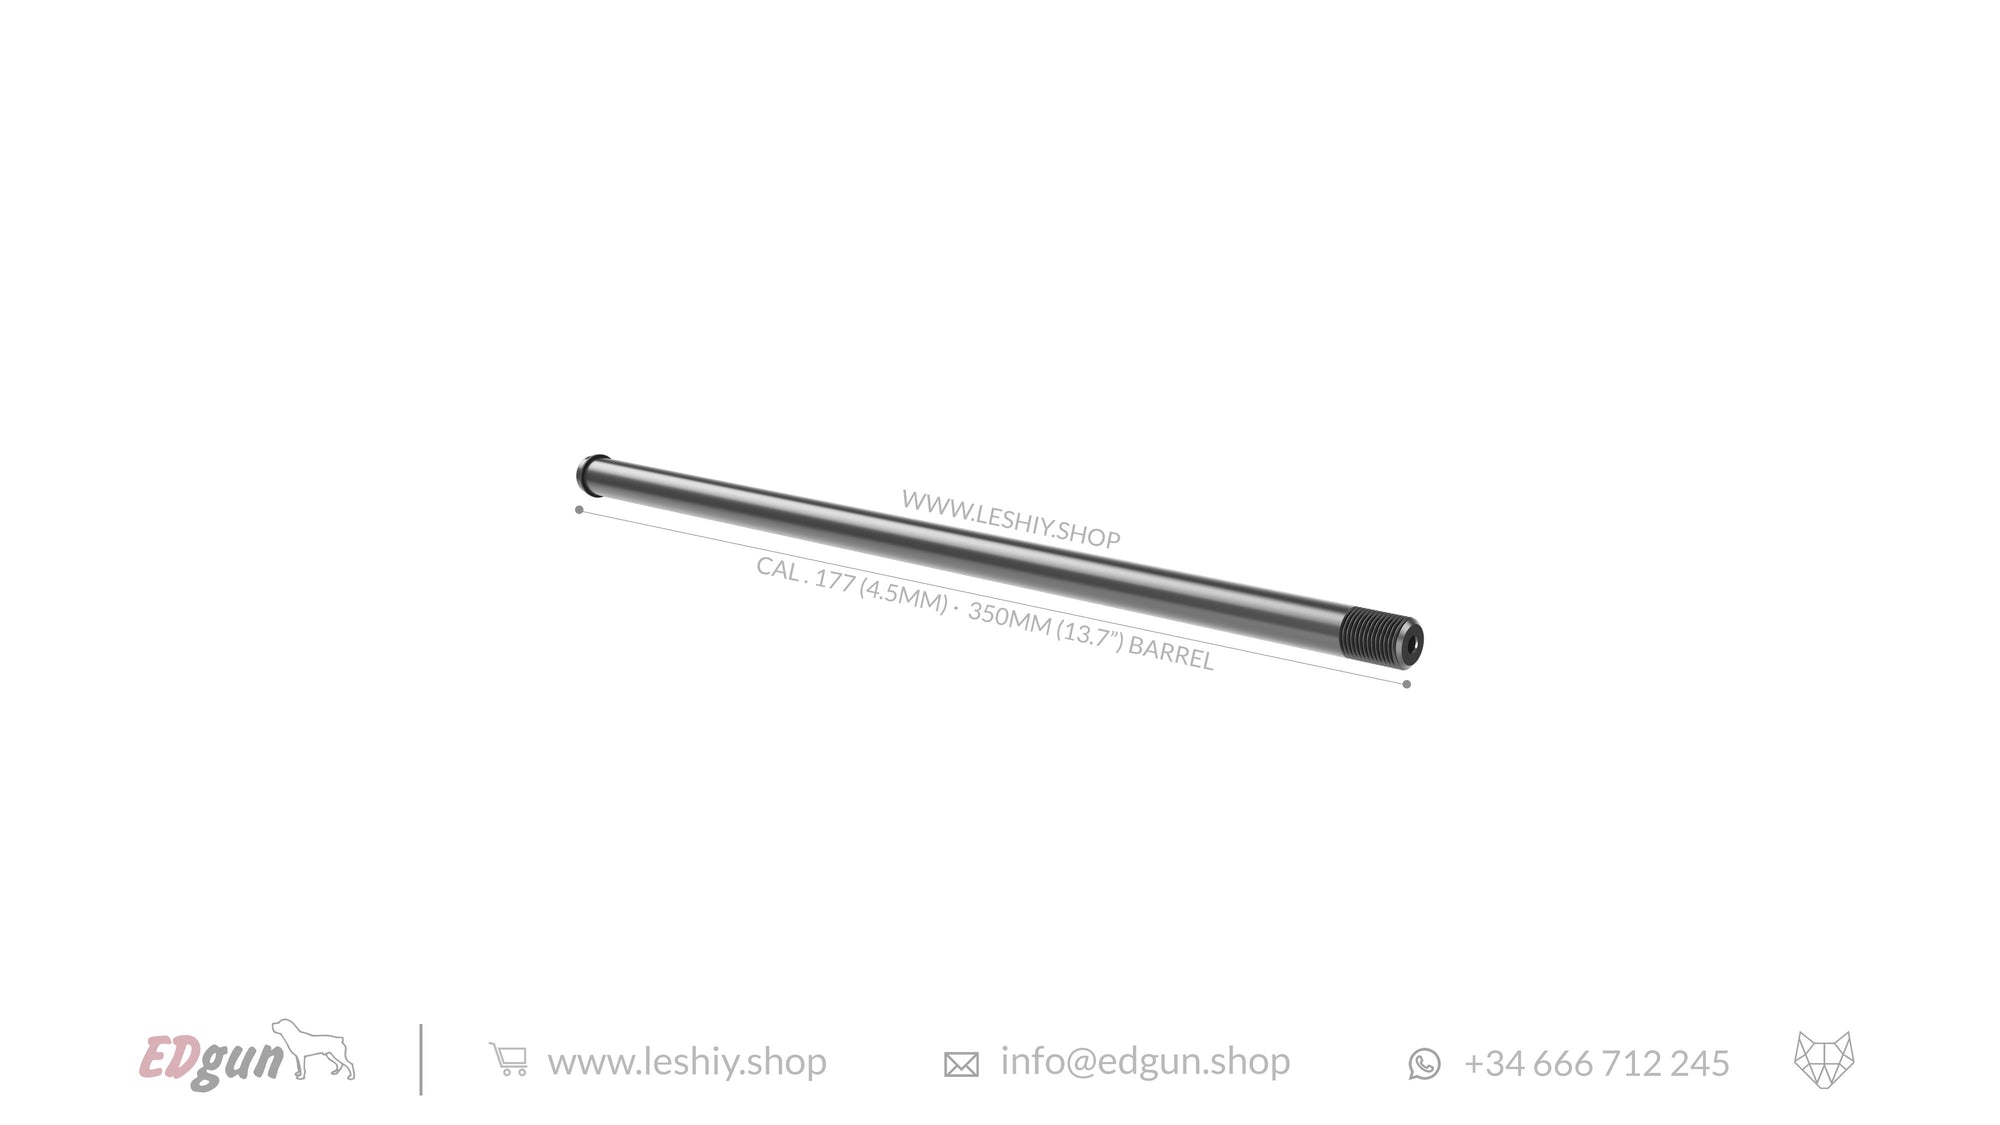 Barrels Lothar Walther cal. 177 (4.5mm) - 350mm (13.7¨) for Leshiy 2